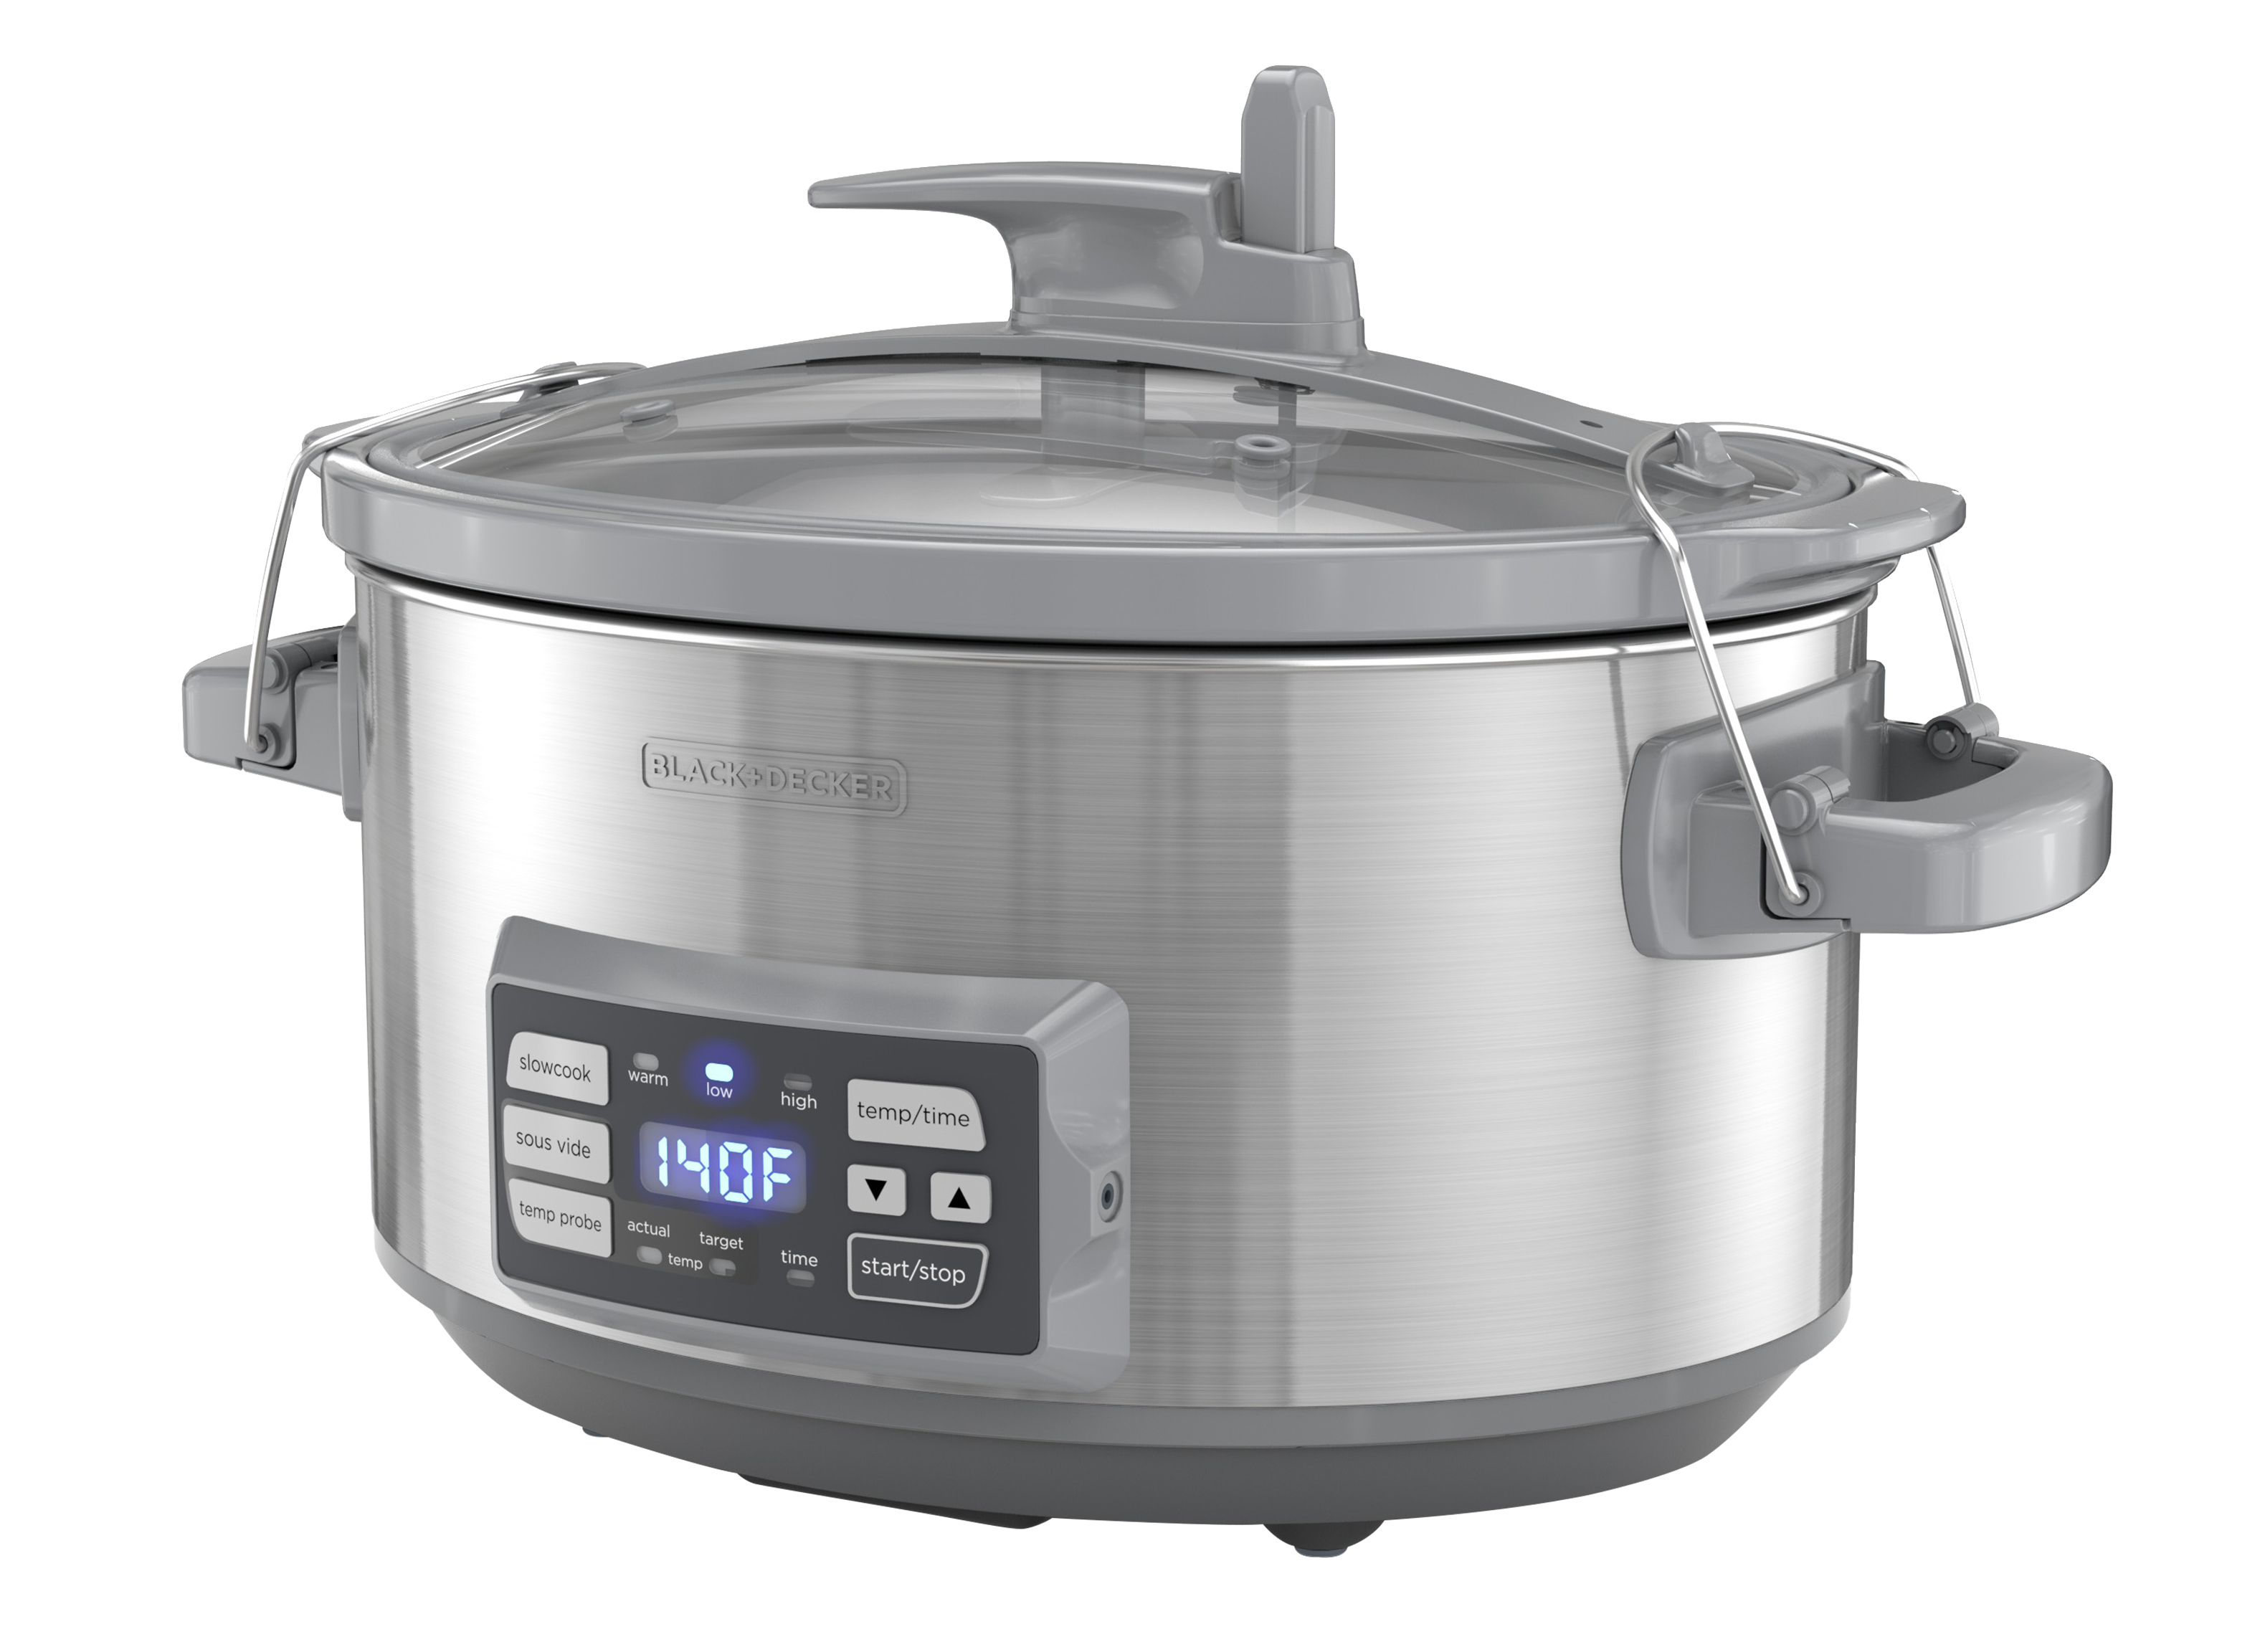 https://crdms.images.consumerreports.org/prod/products/cr/models/400772-programmable-slow-cookers-black-decker-digital-with-temperature-probe-precision-sous-vide-scd7007ssd-10011136.png